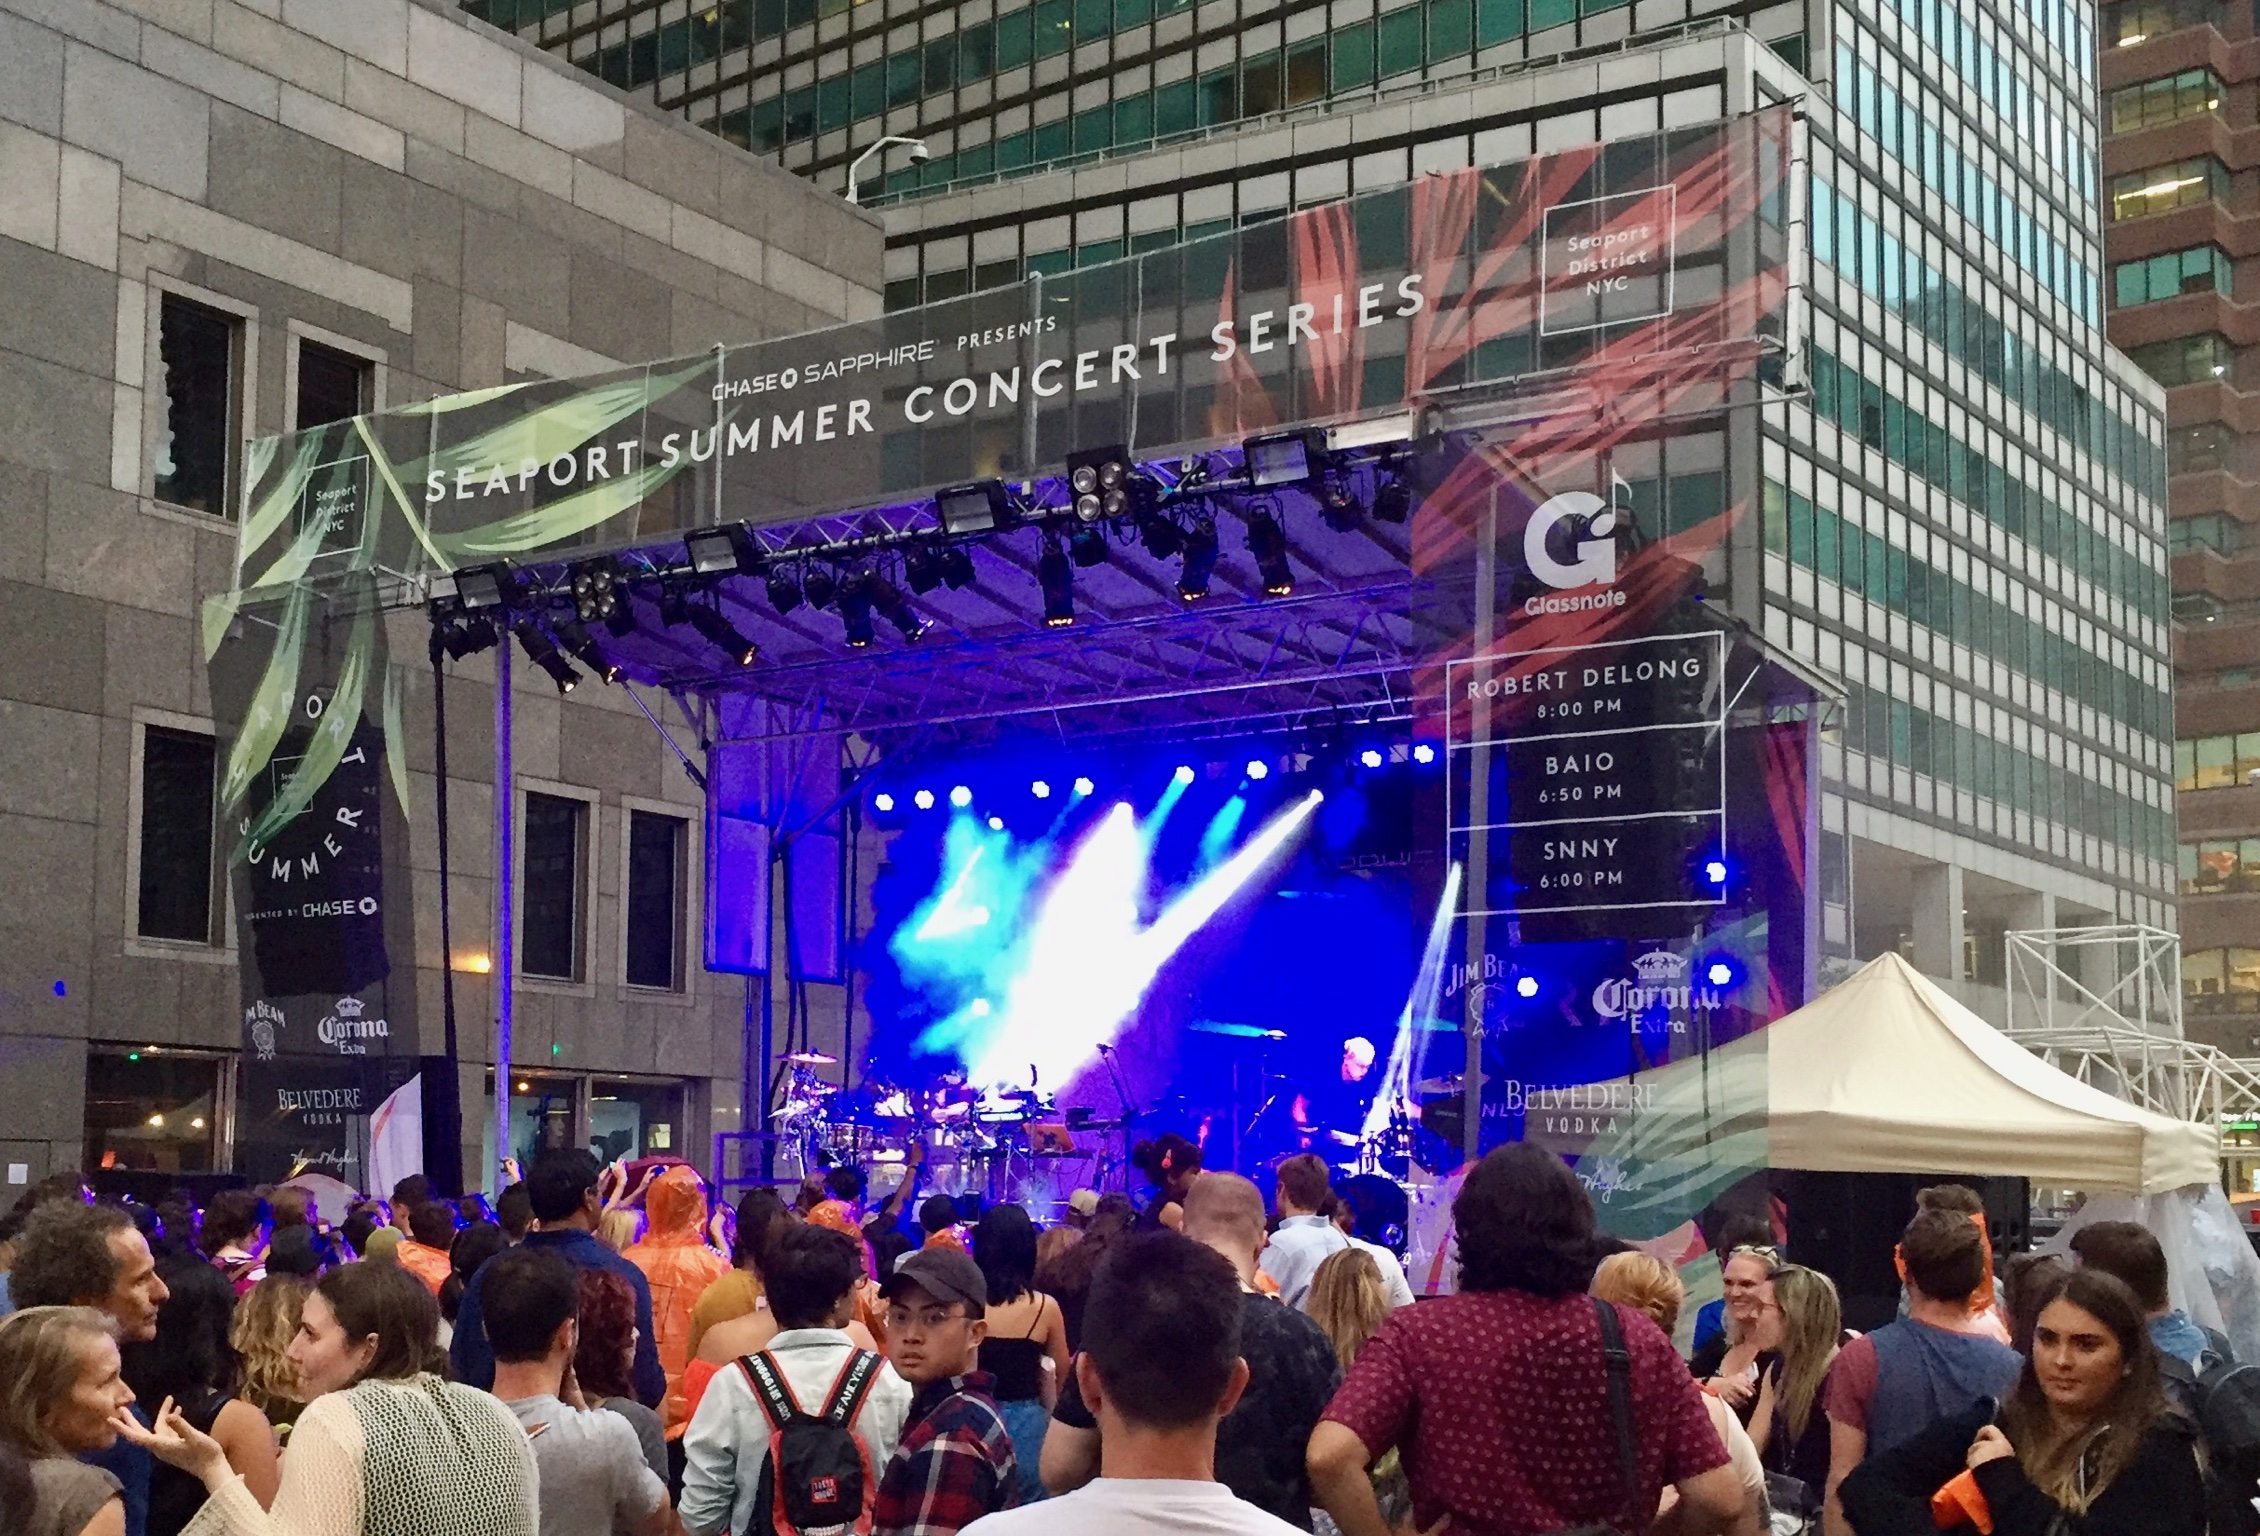 Production Manager - Seaport Summer Concert Series